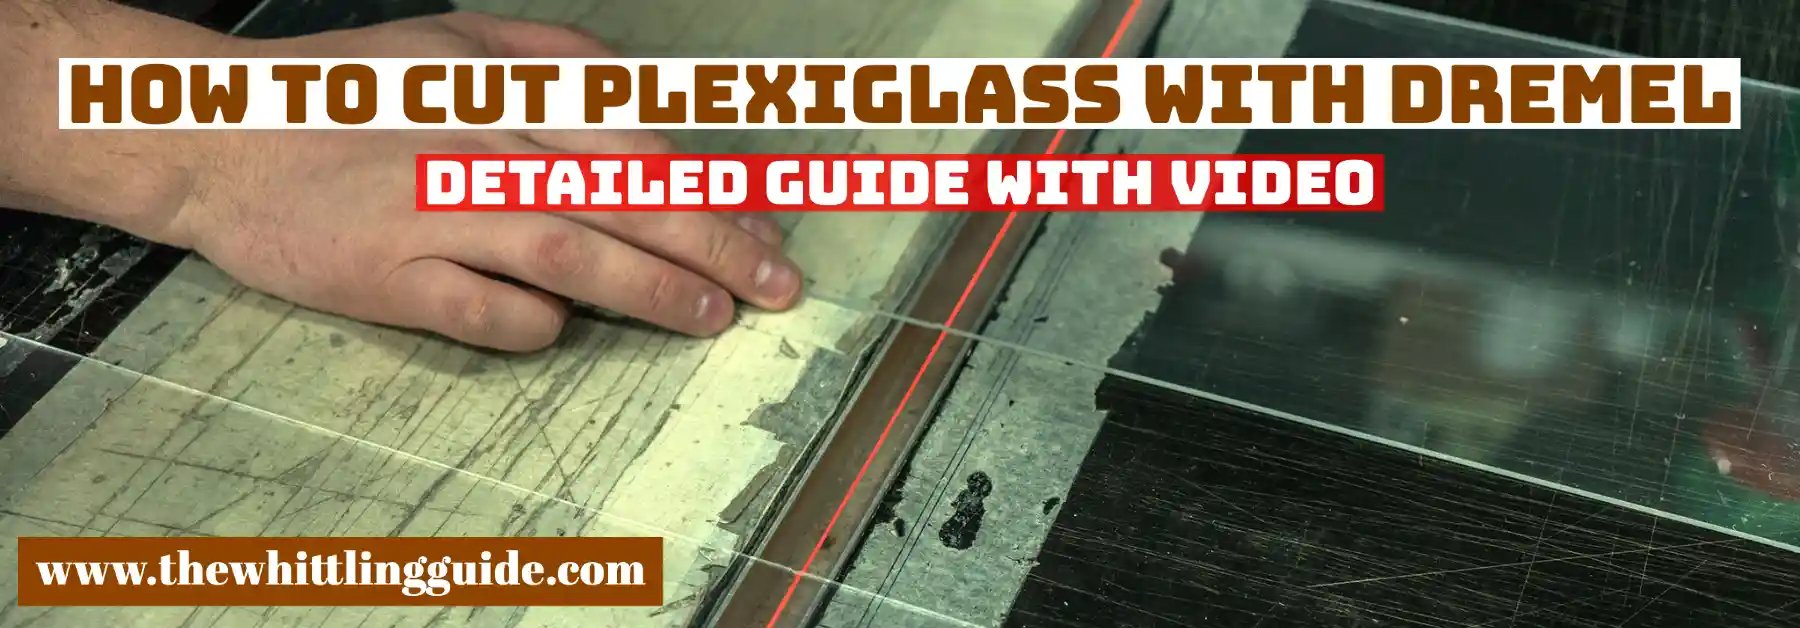 How to cut plexiglass with Dremel | Detailed Guide with Video